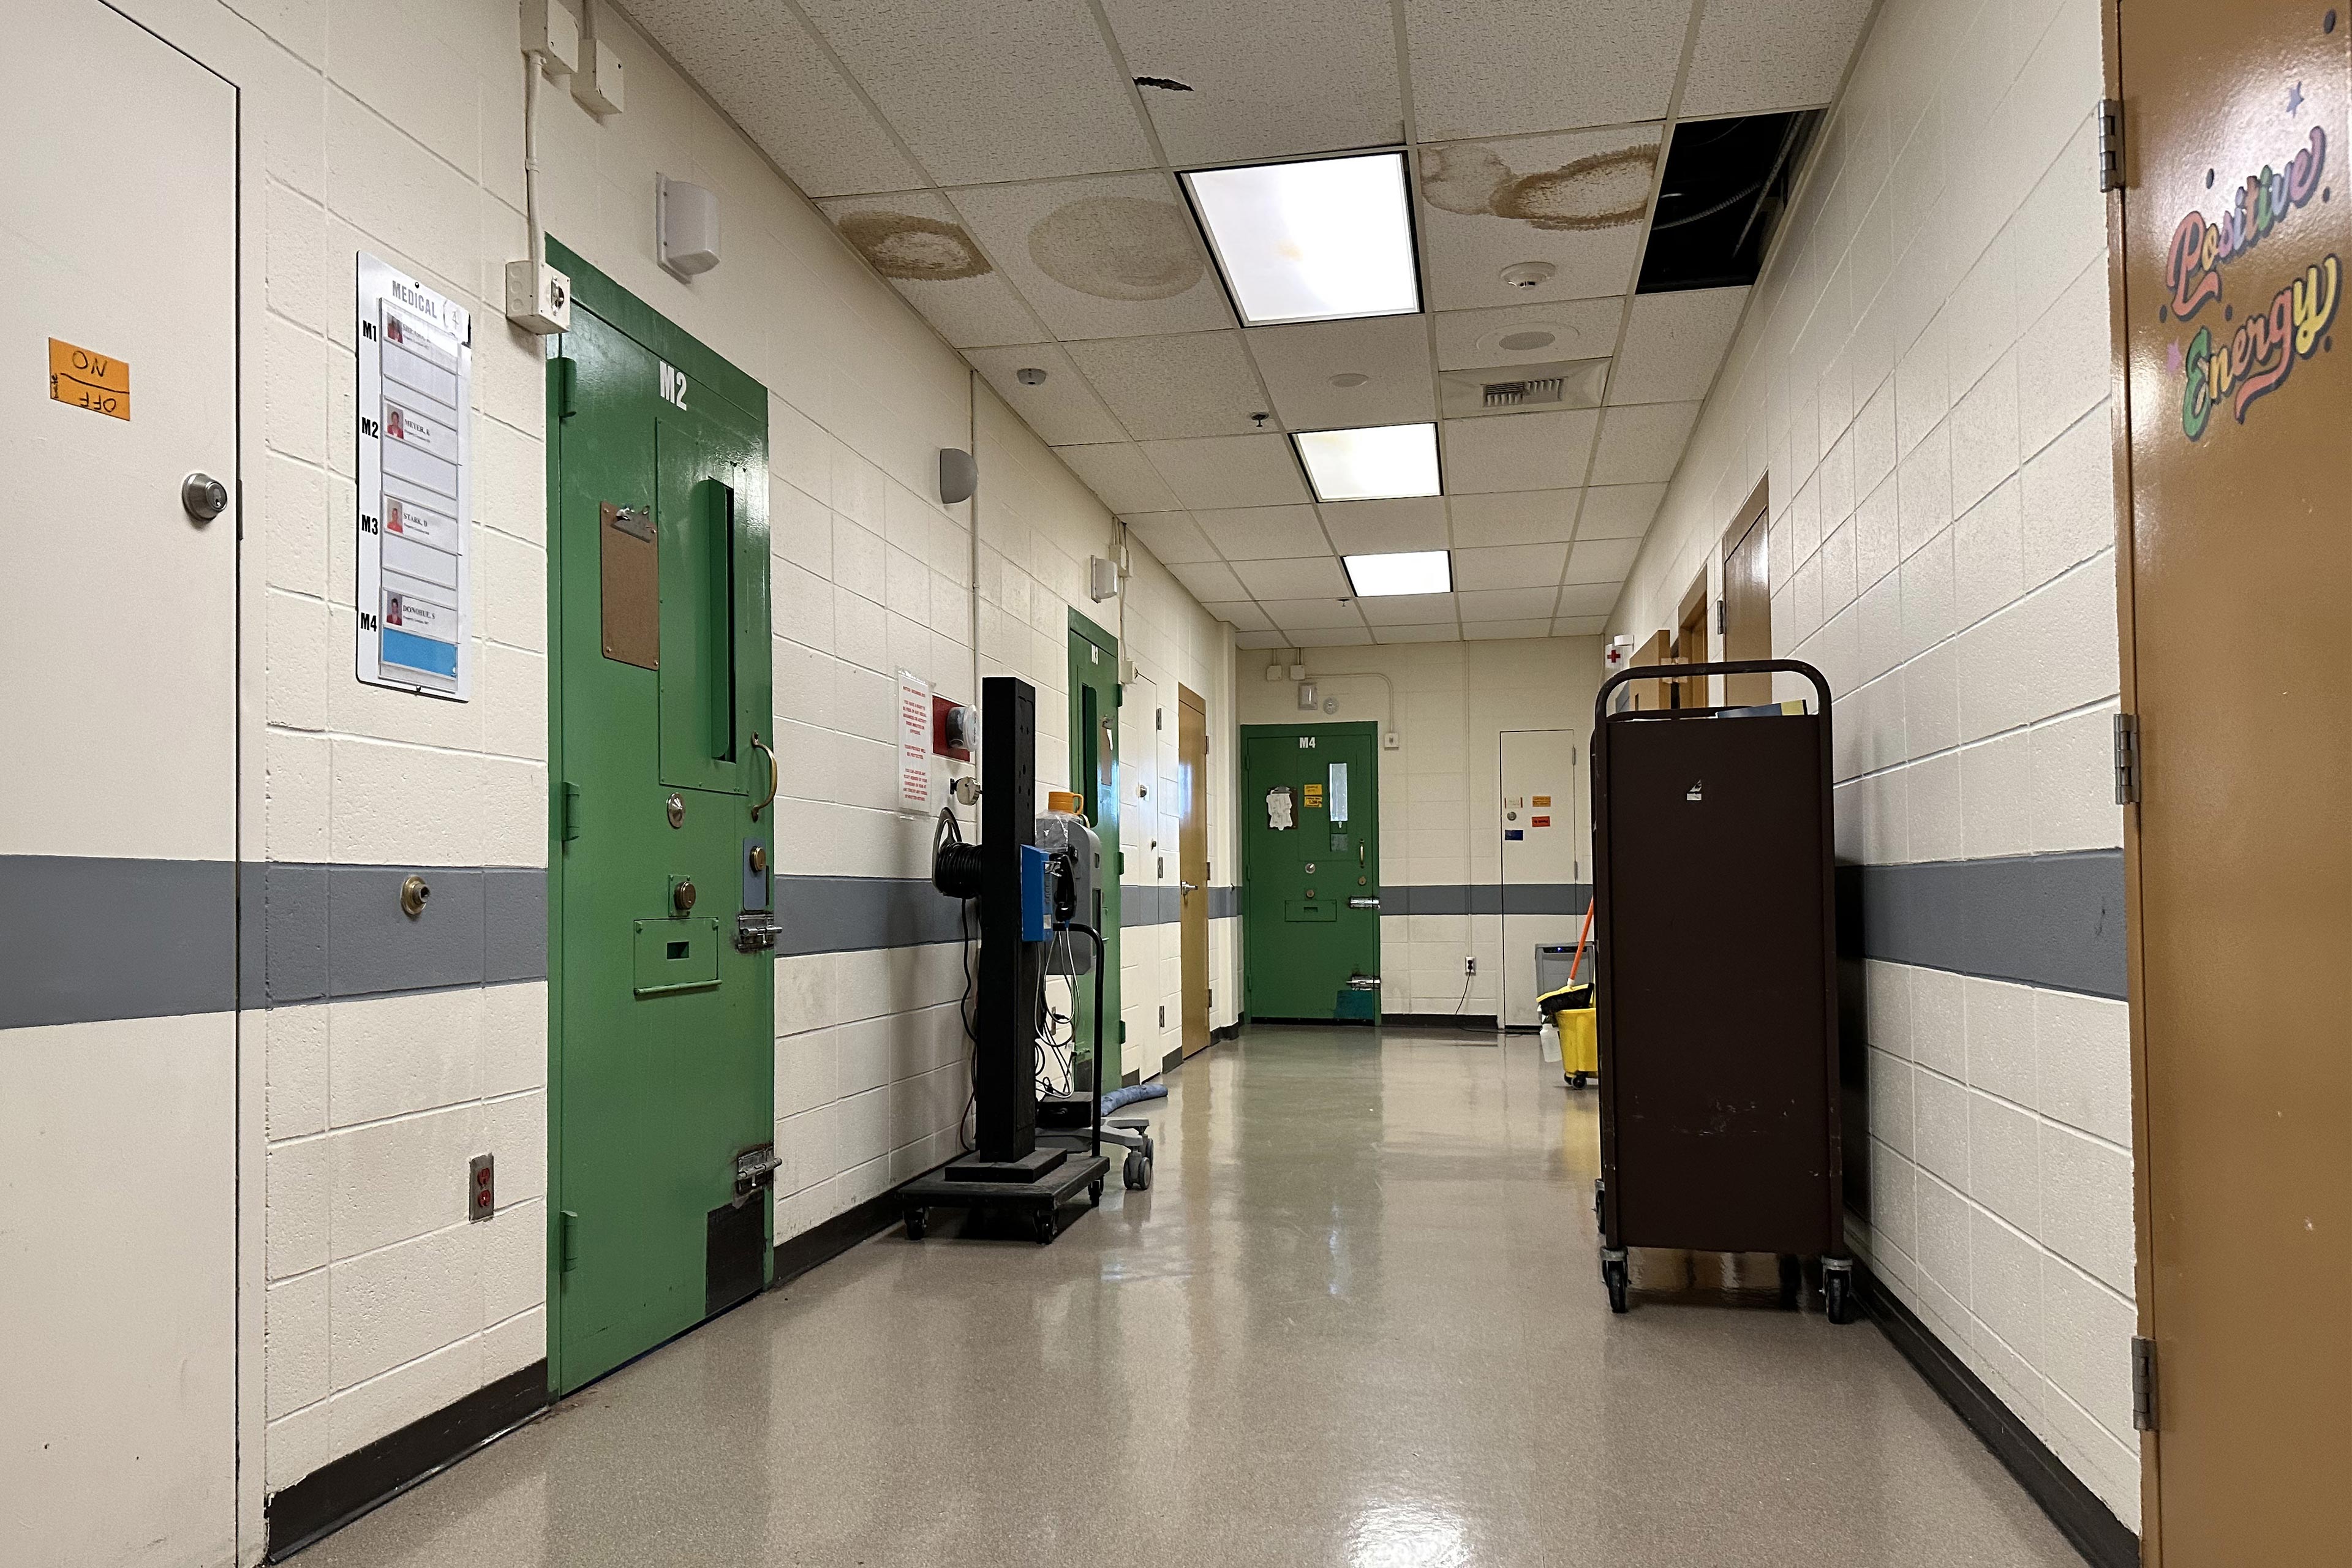 A photo of a corridor inside of a jail.